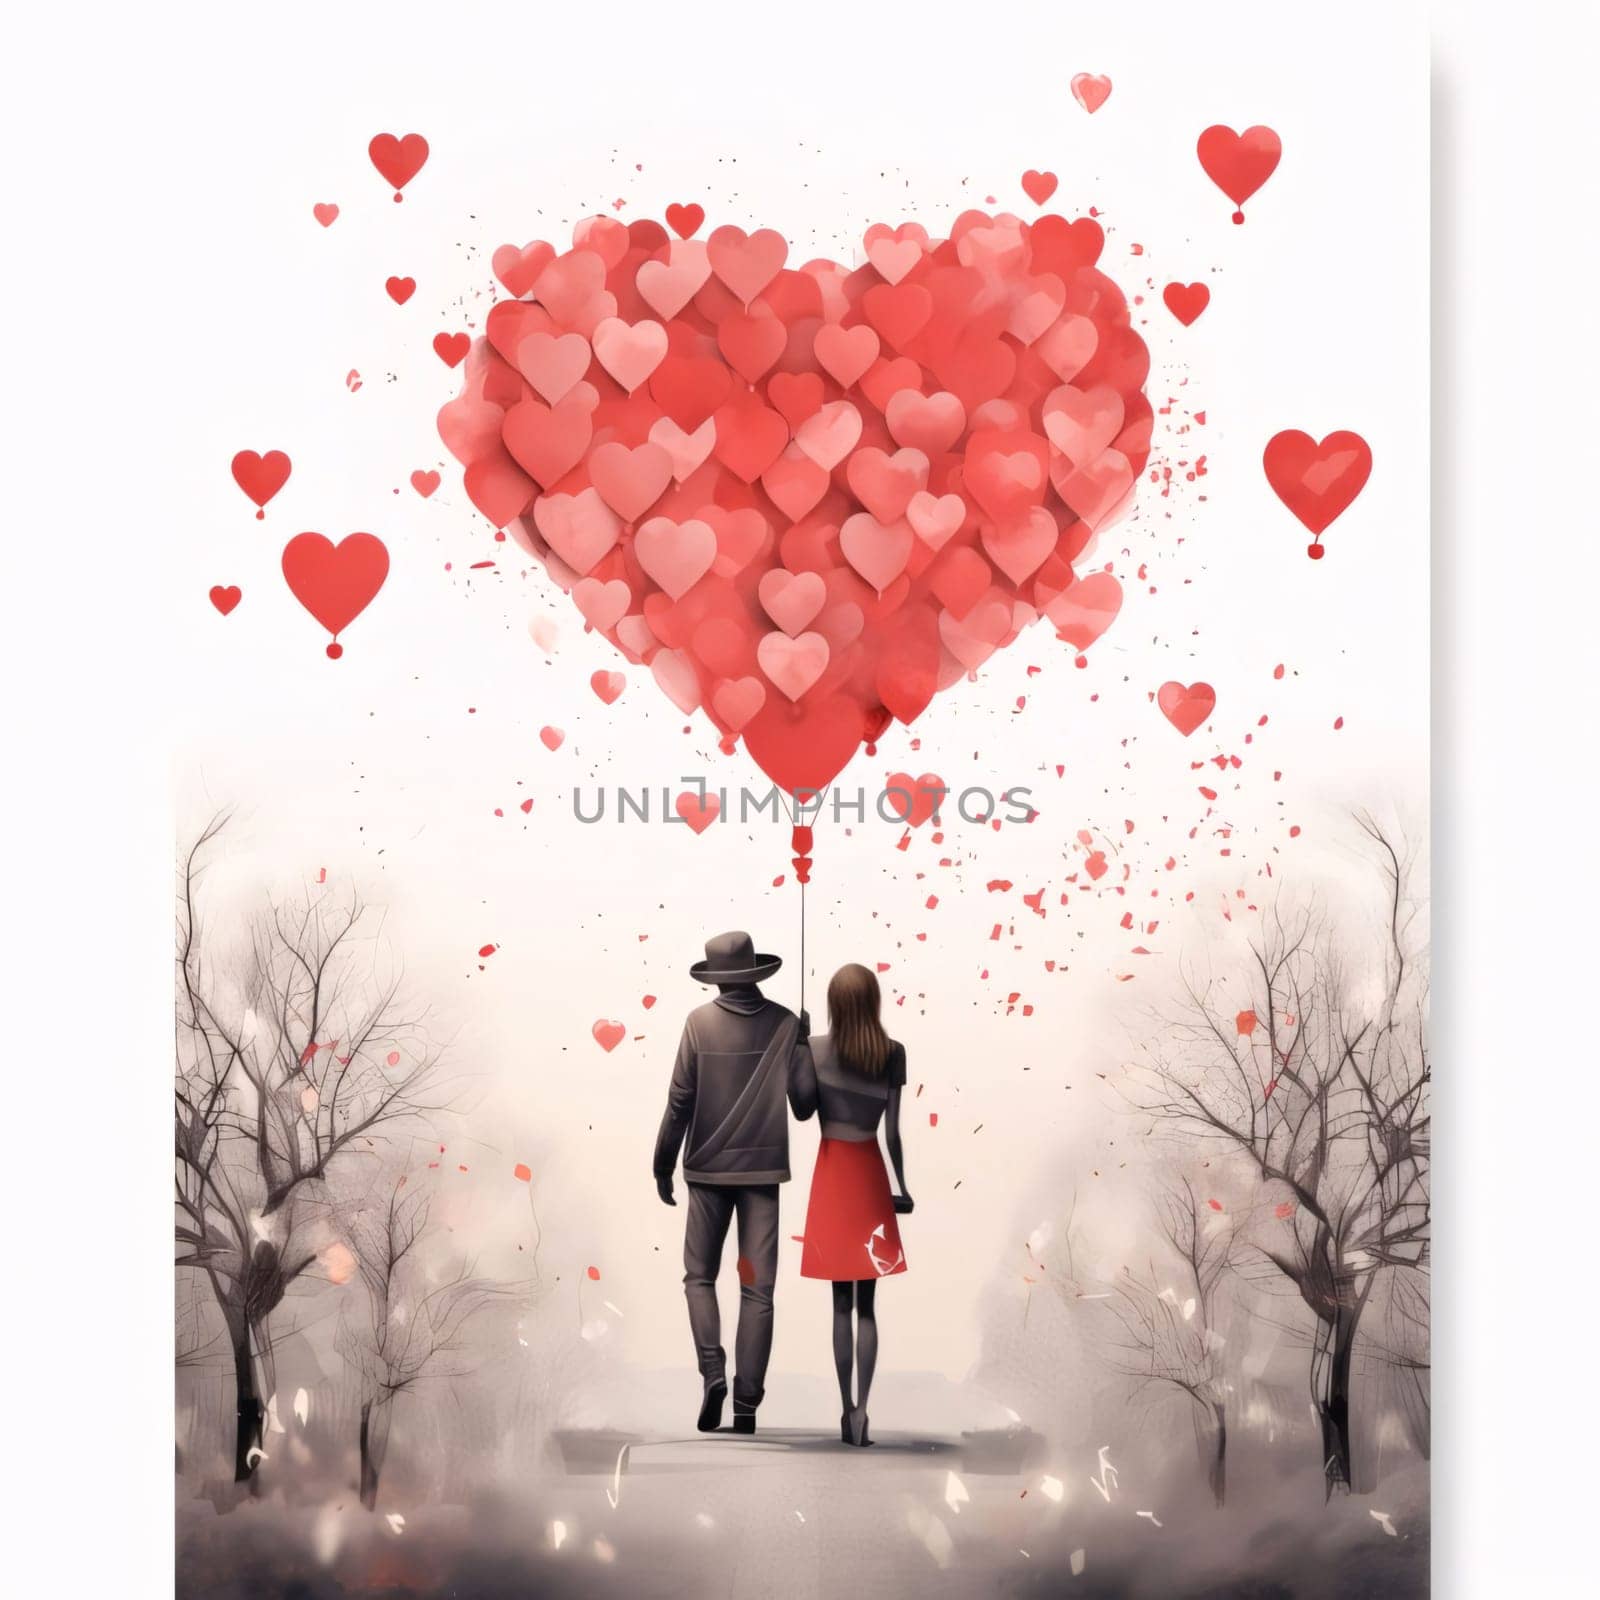 A couple in love standing under a large heart made of tiny hearts on a light background, with dry tree trunks all around. Heart as a symbol of affection and love. The time of falling in love and love.